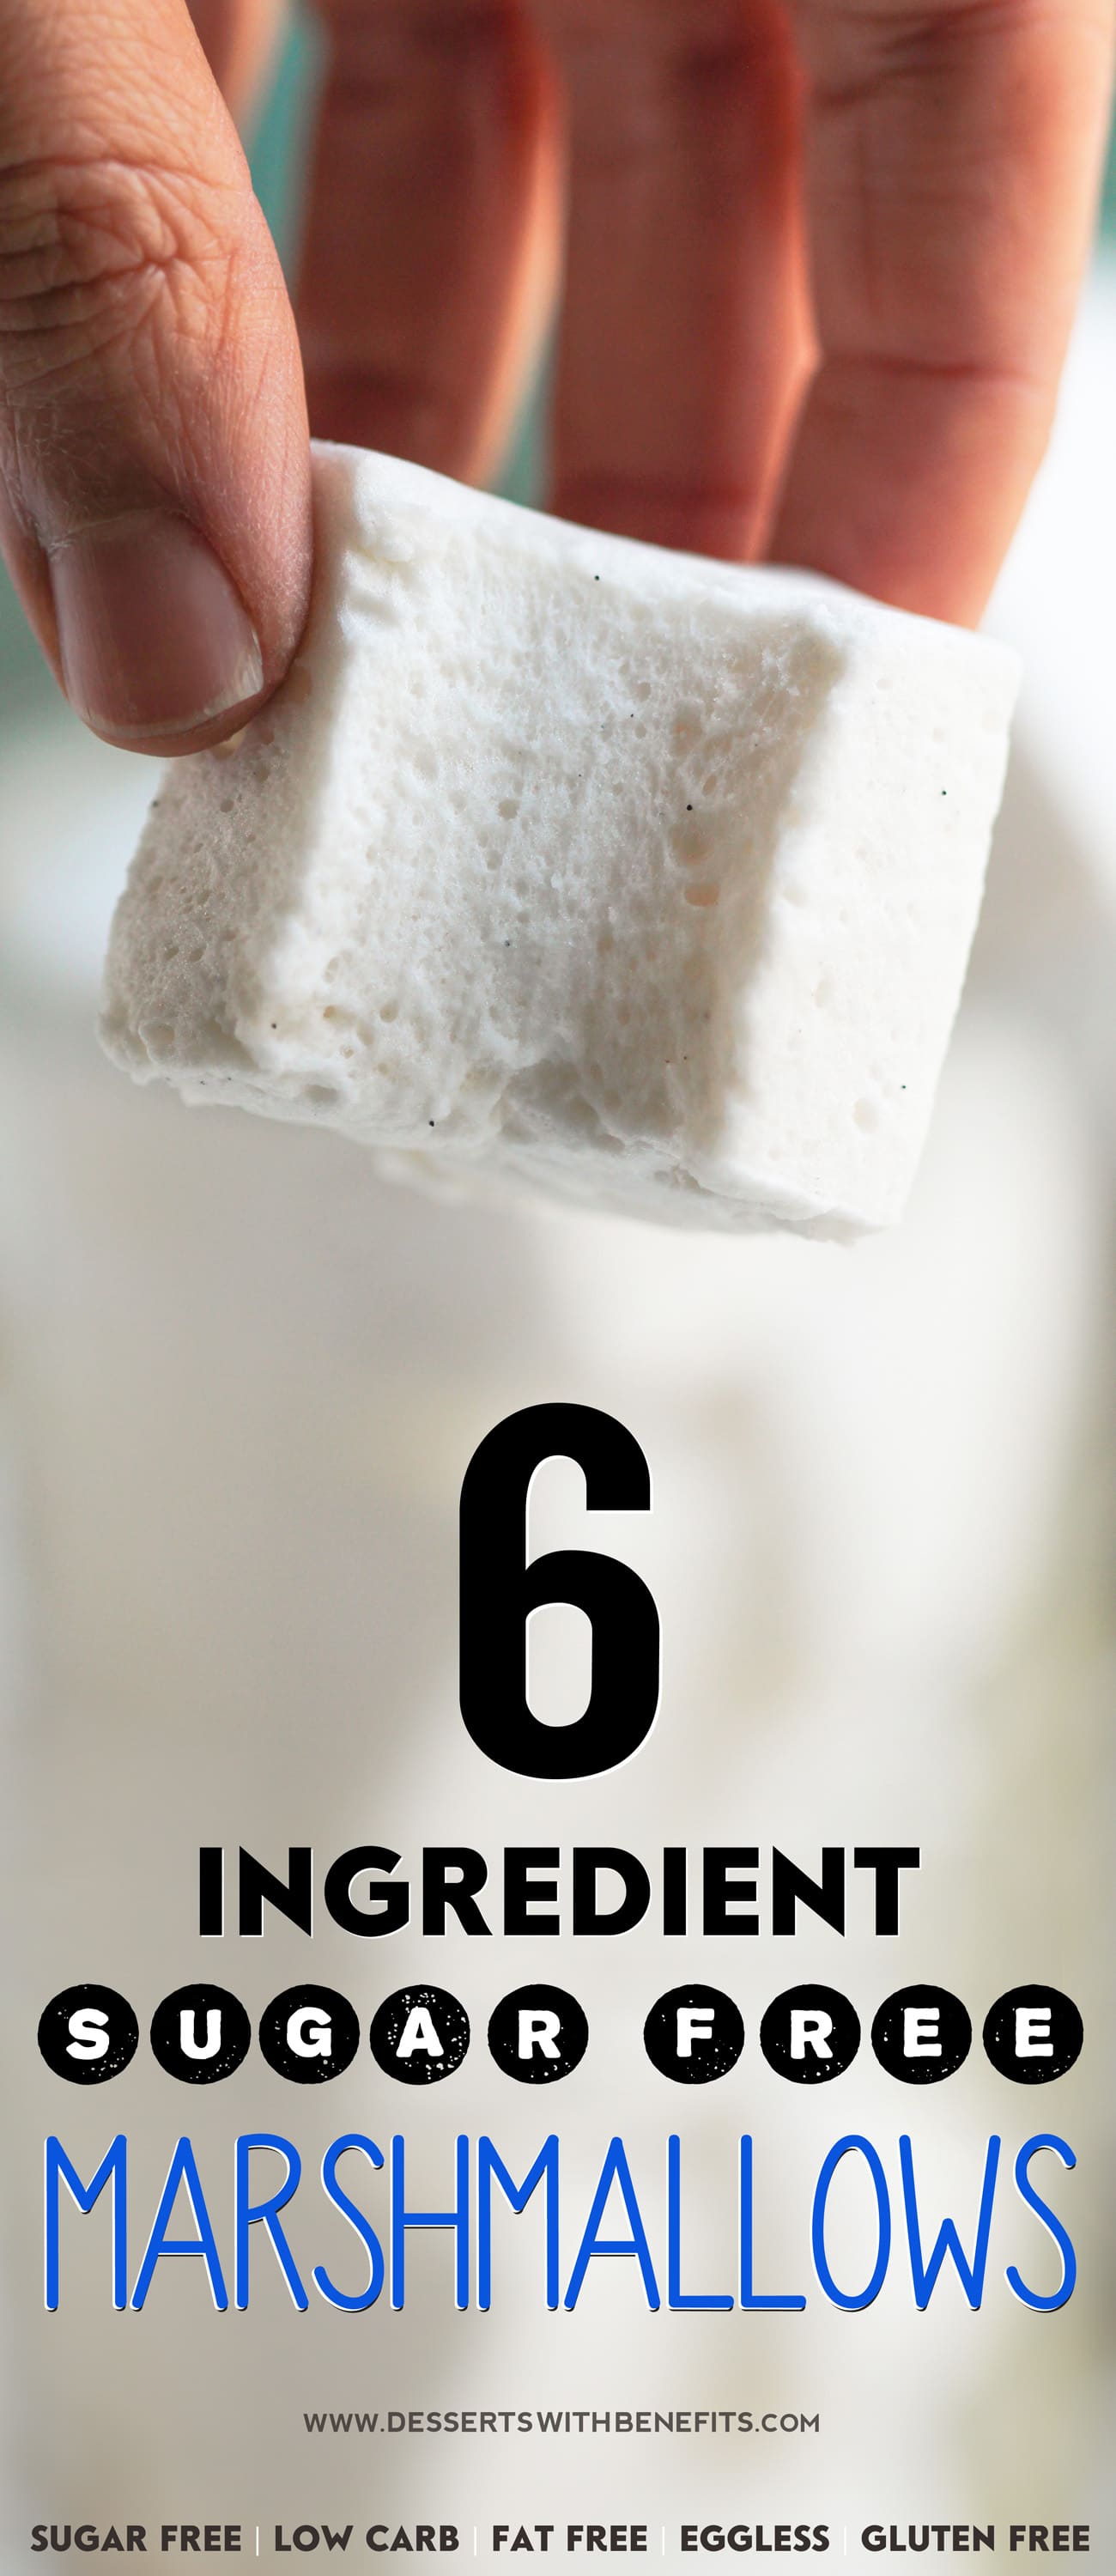 This recipe for Healthy Homemade Sugar-Free Marshmallows is SUPER fun to make and requires just 6 ingredients! You’d never know that these fluffy, sweet marshmallows are all natural, sugar free, low carb, fat free, eggless, and gluten free -- Healthy Dessert Recipes at Desserts with Benefits